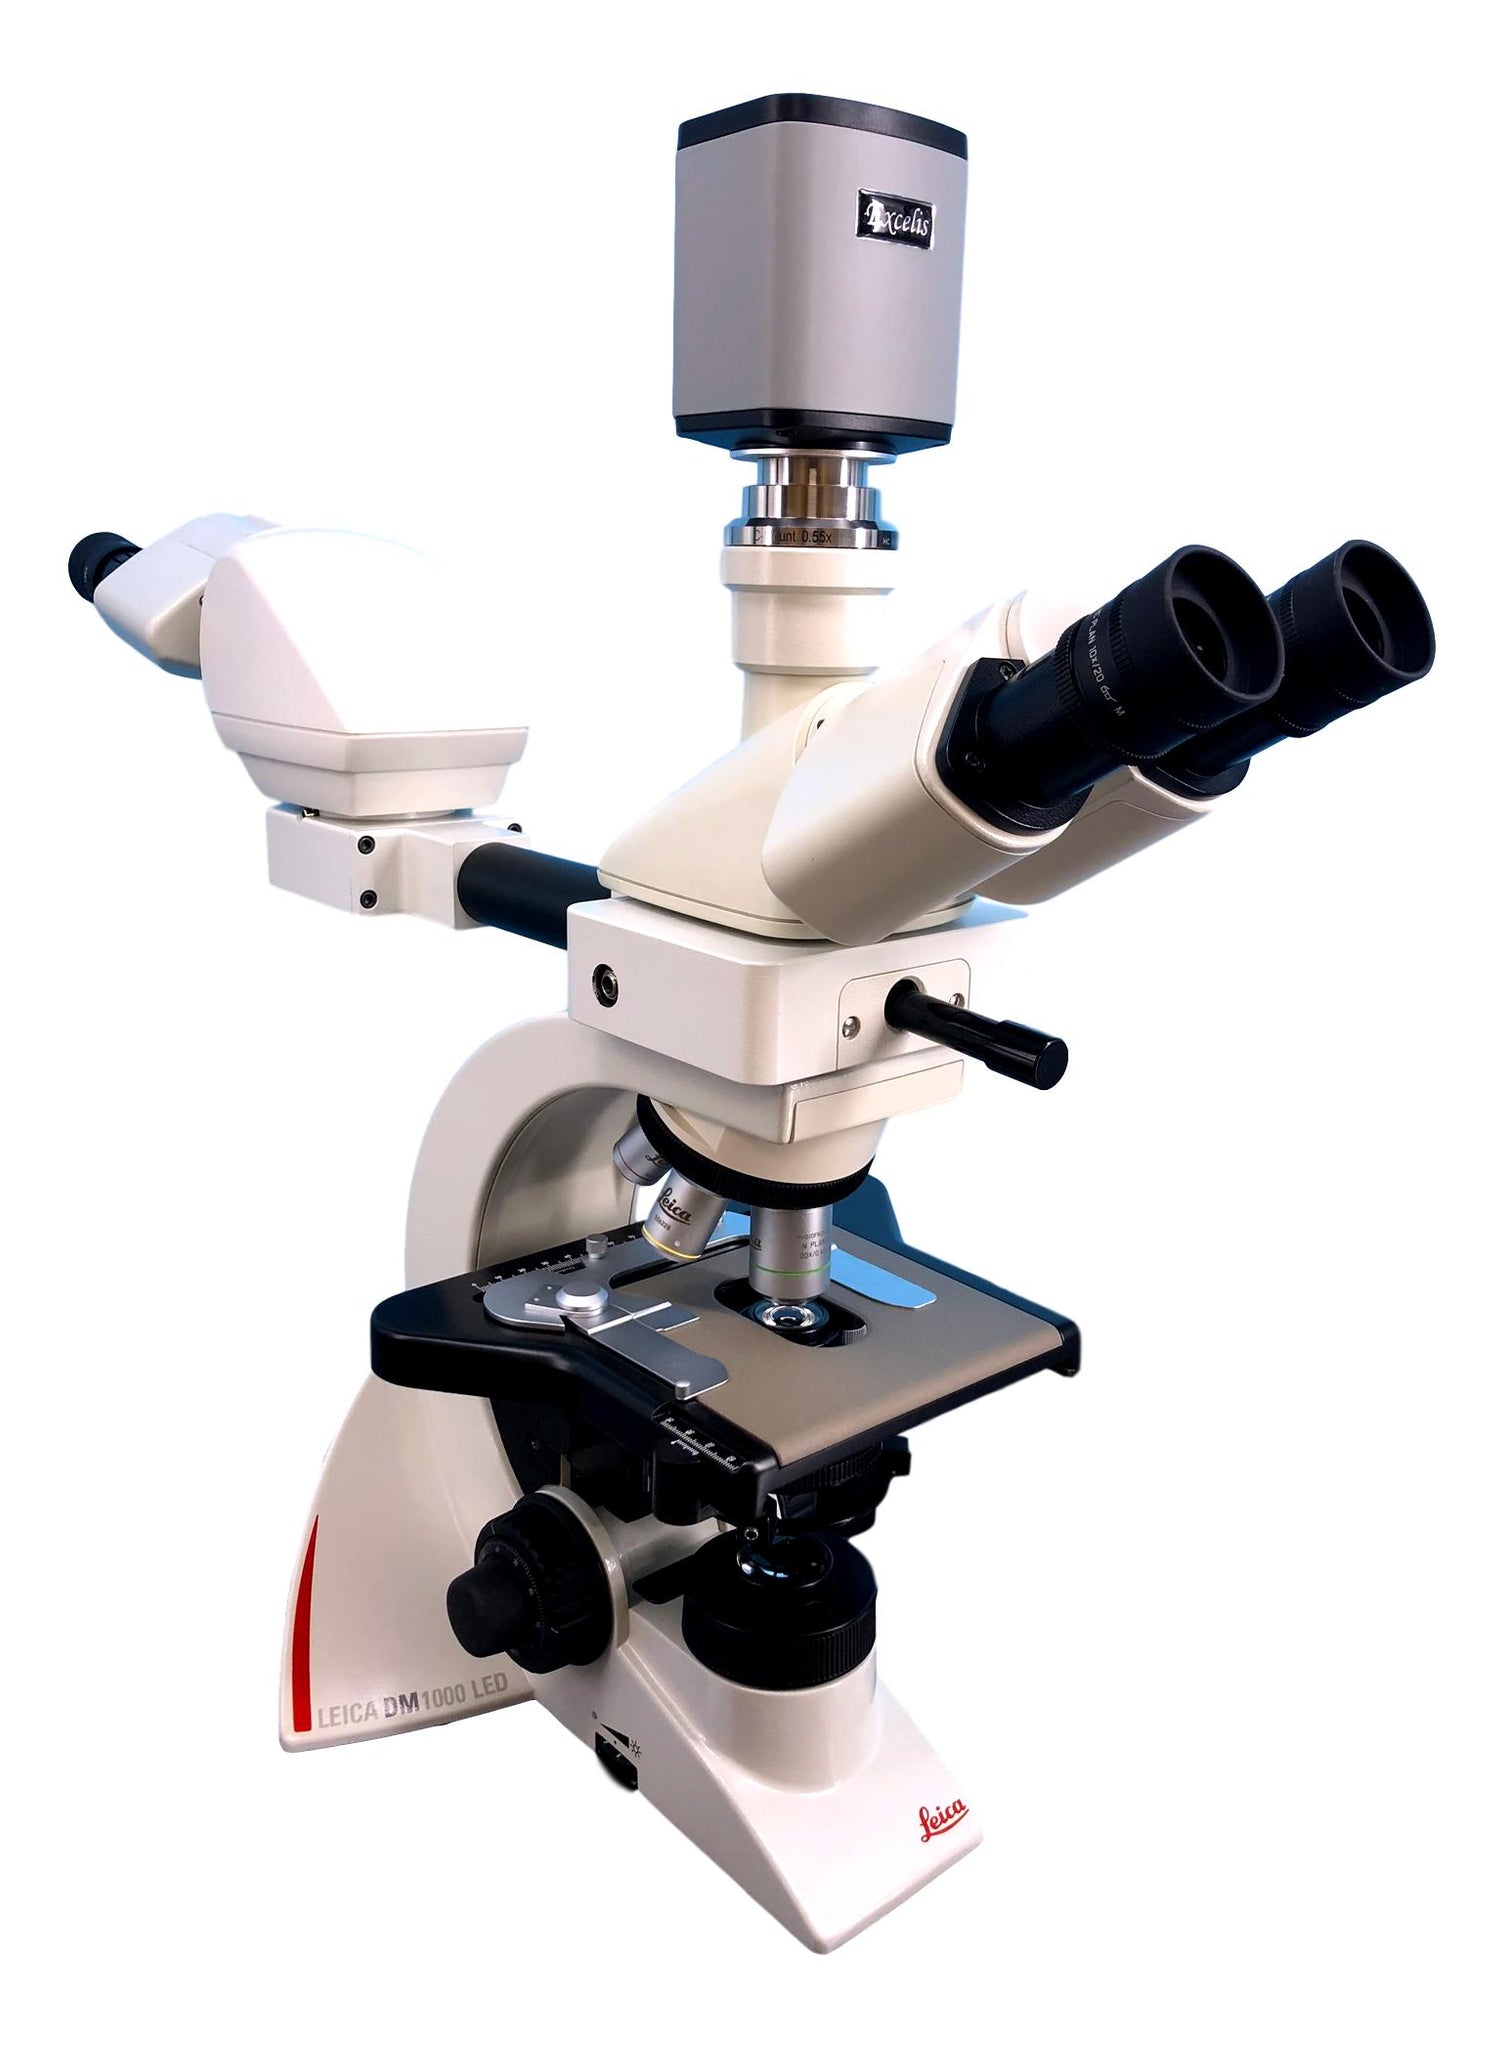 Leica DM1000 Dual Viewing Digital Pathology Microscope - Face To Face